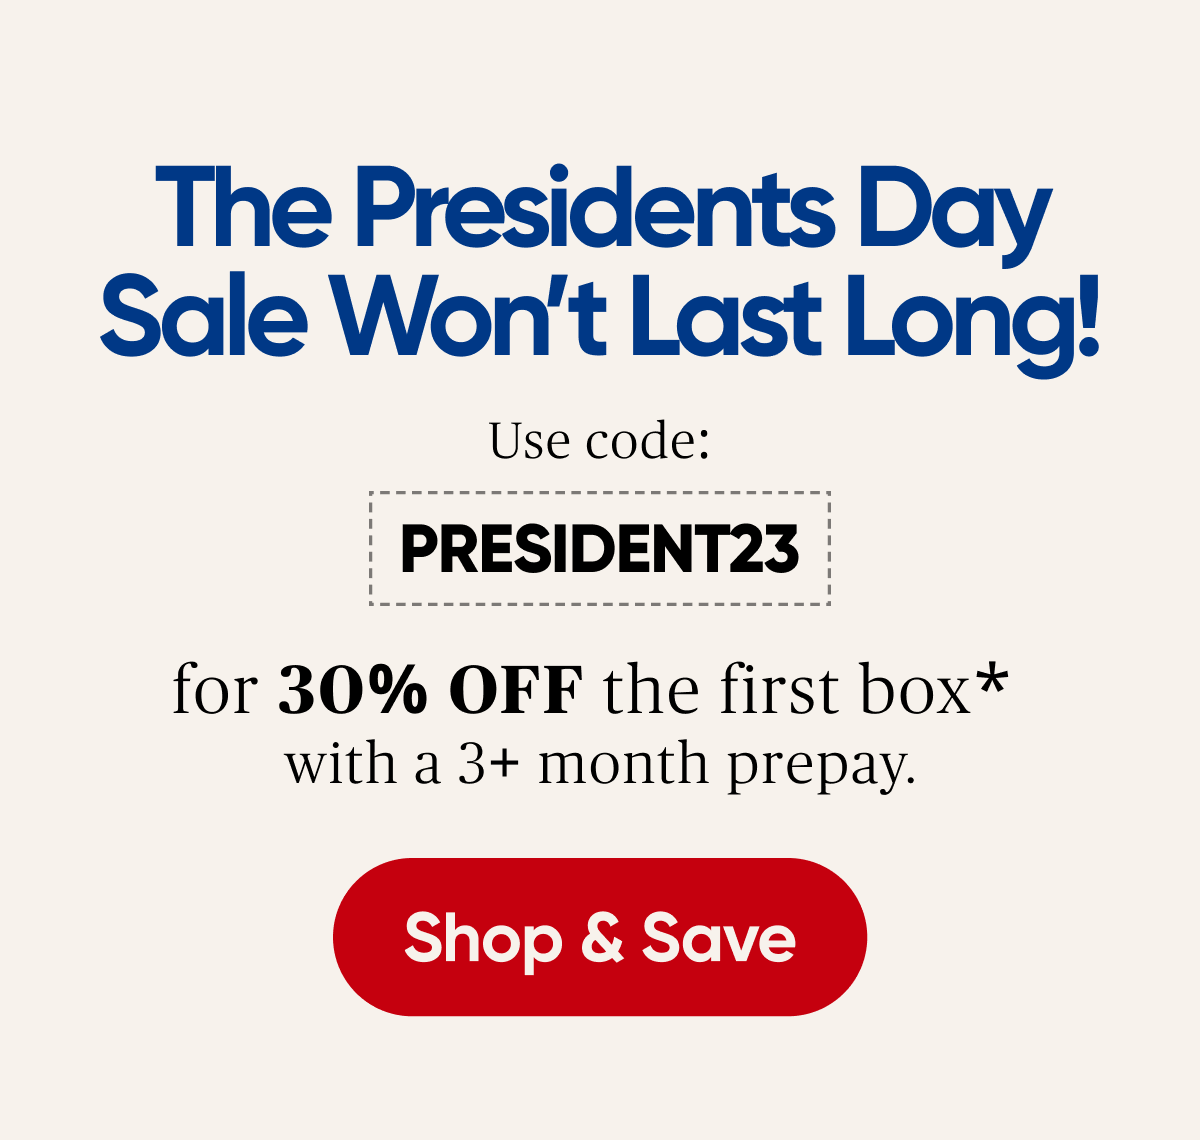 The Presidents Day Sale Wont Last Long! Use code: PRESIDENT23 for 30% OFF the first box* with a 3+ month prepay. 